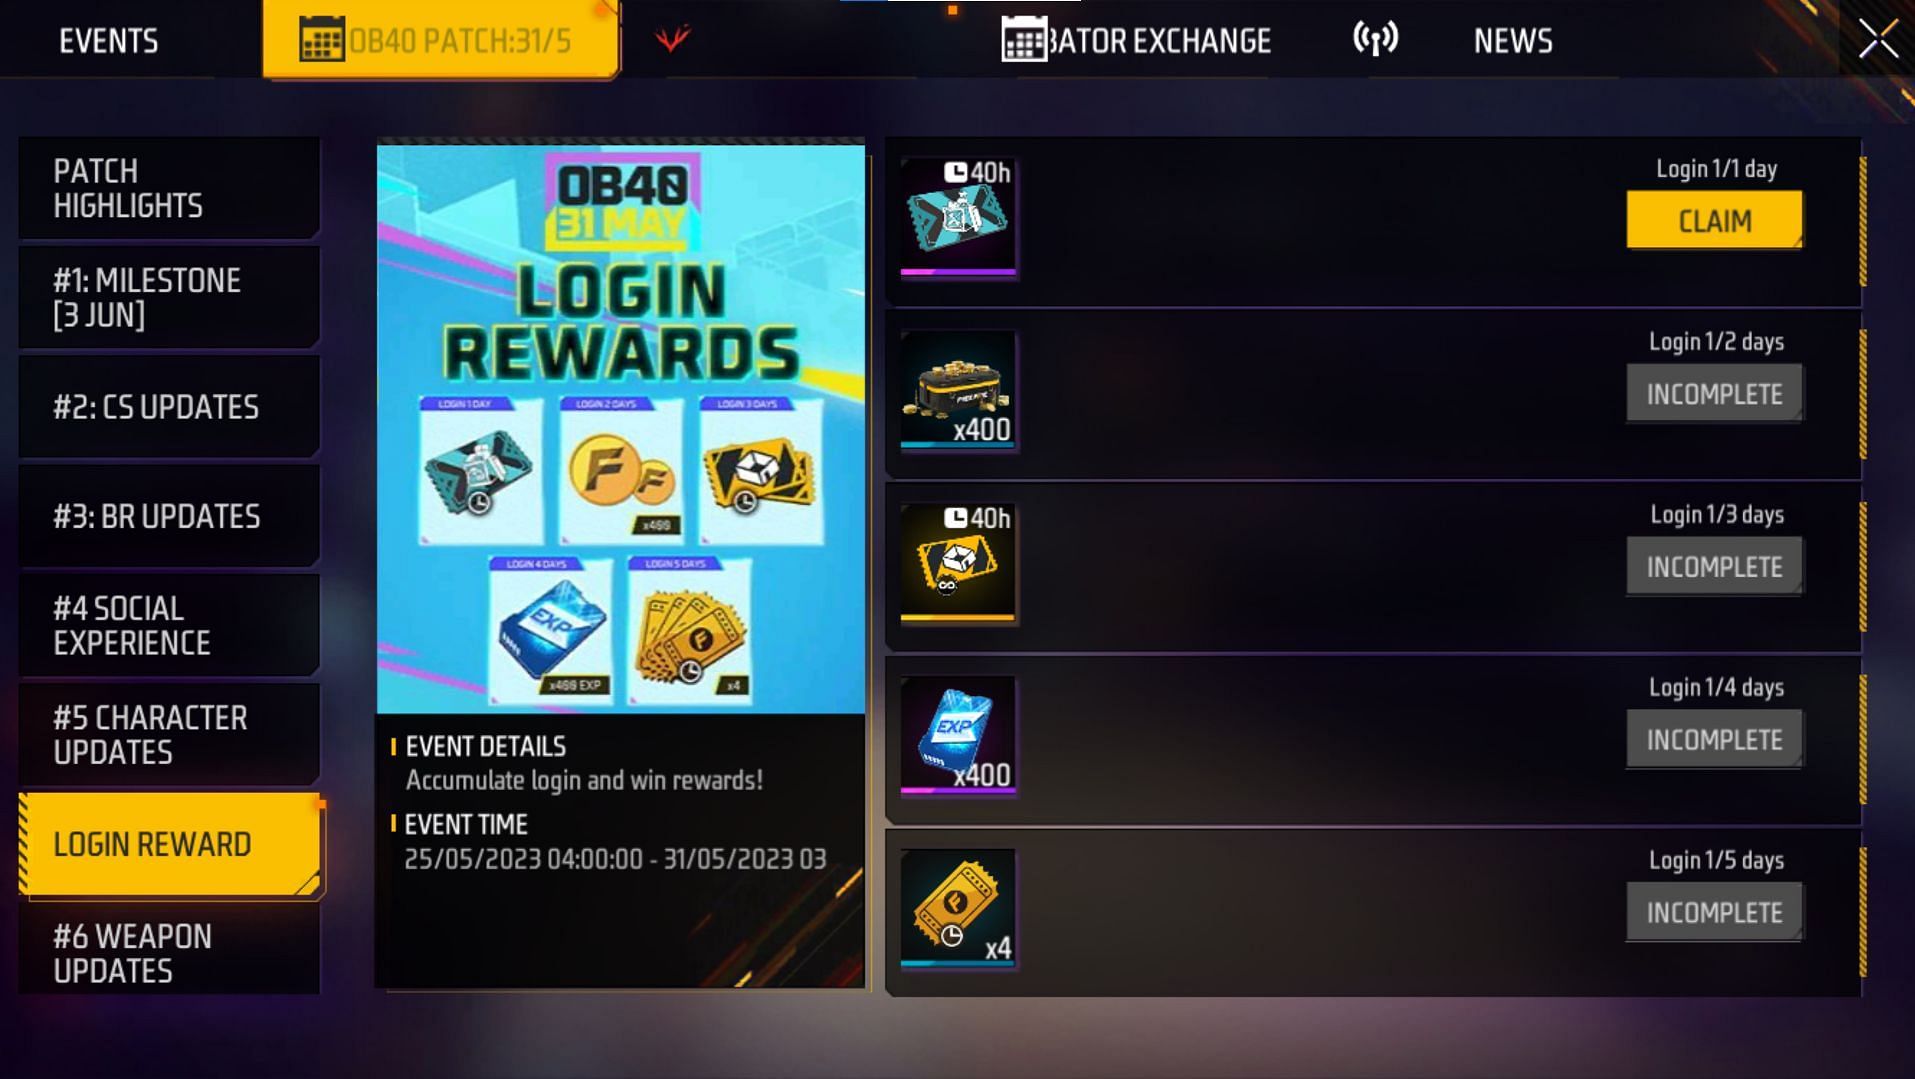 Claim the rewards by tapping on the Claim button (Image via Garena)